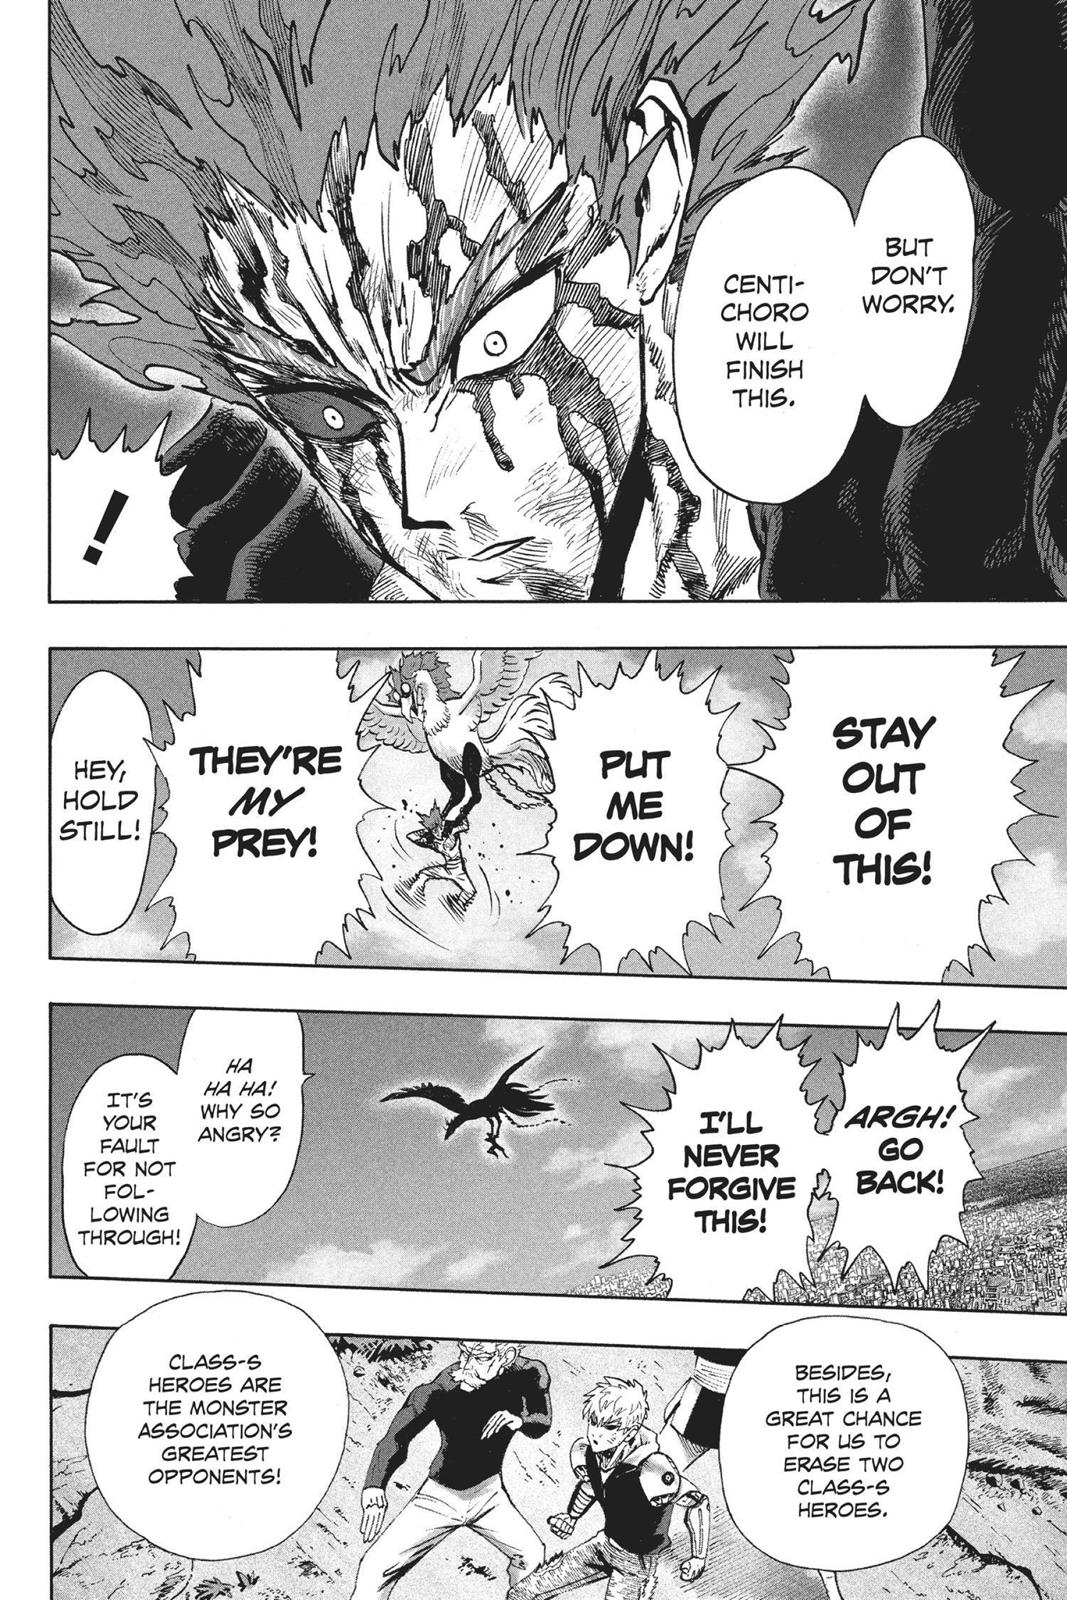 One-Punch Man, Punch 85 image 043